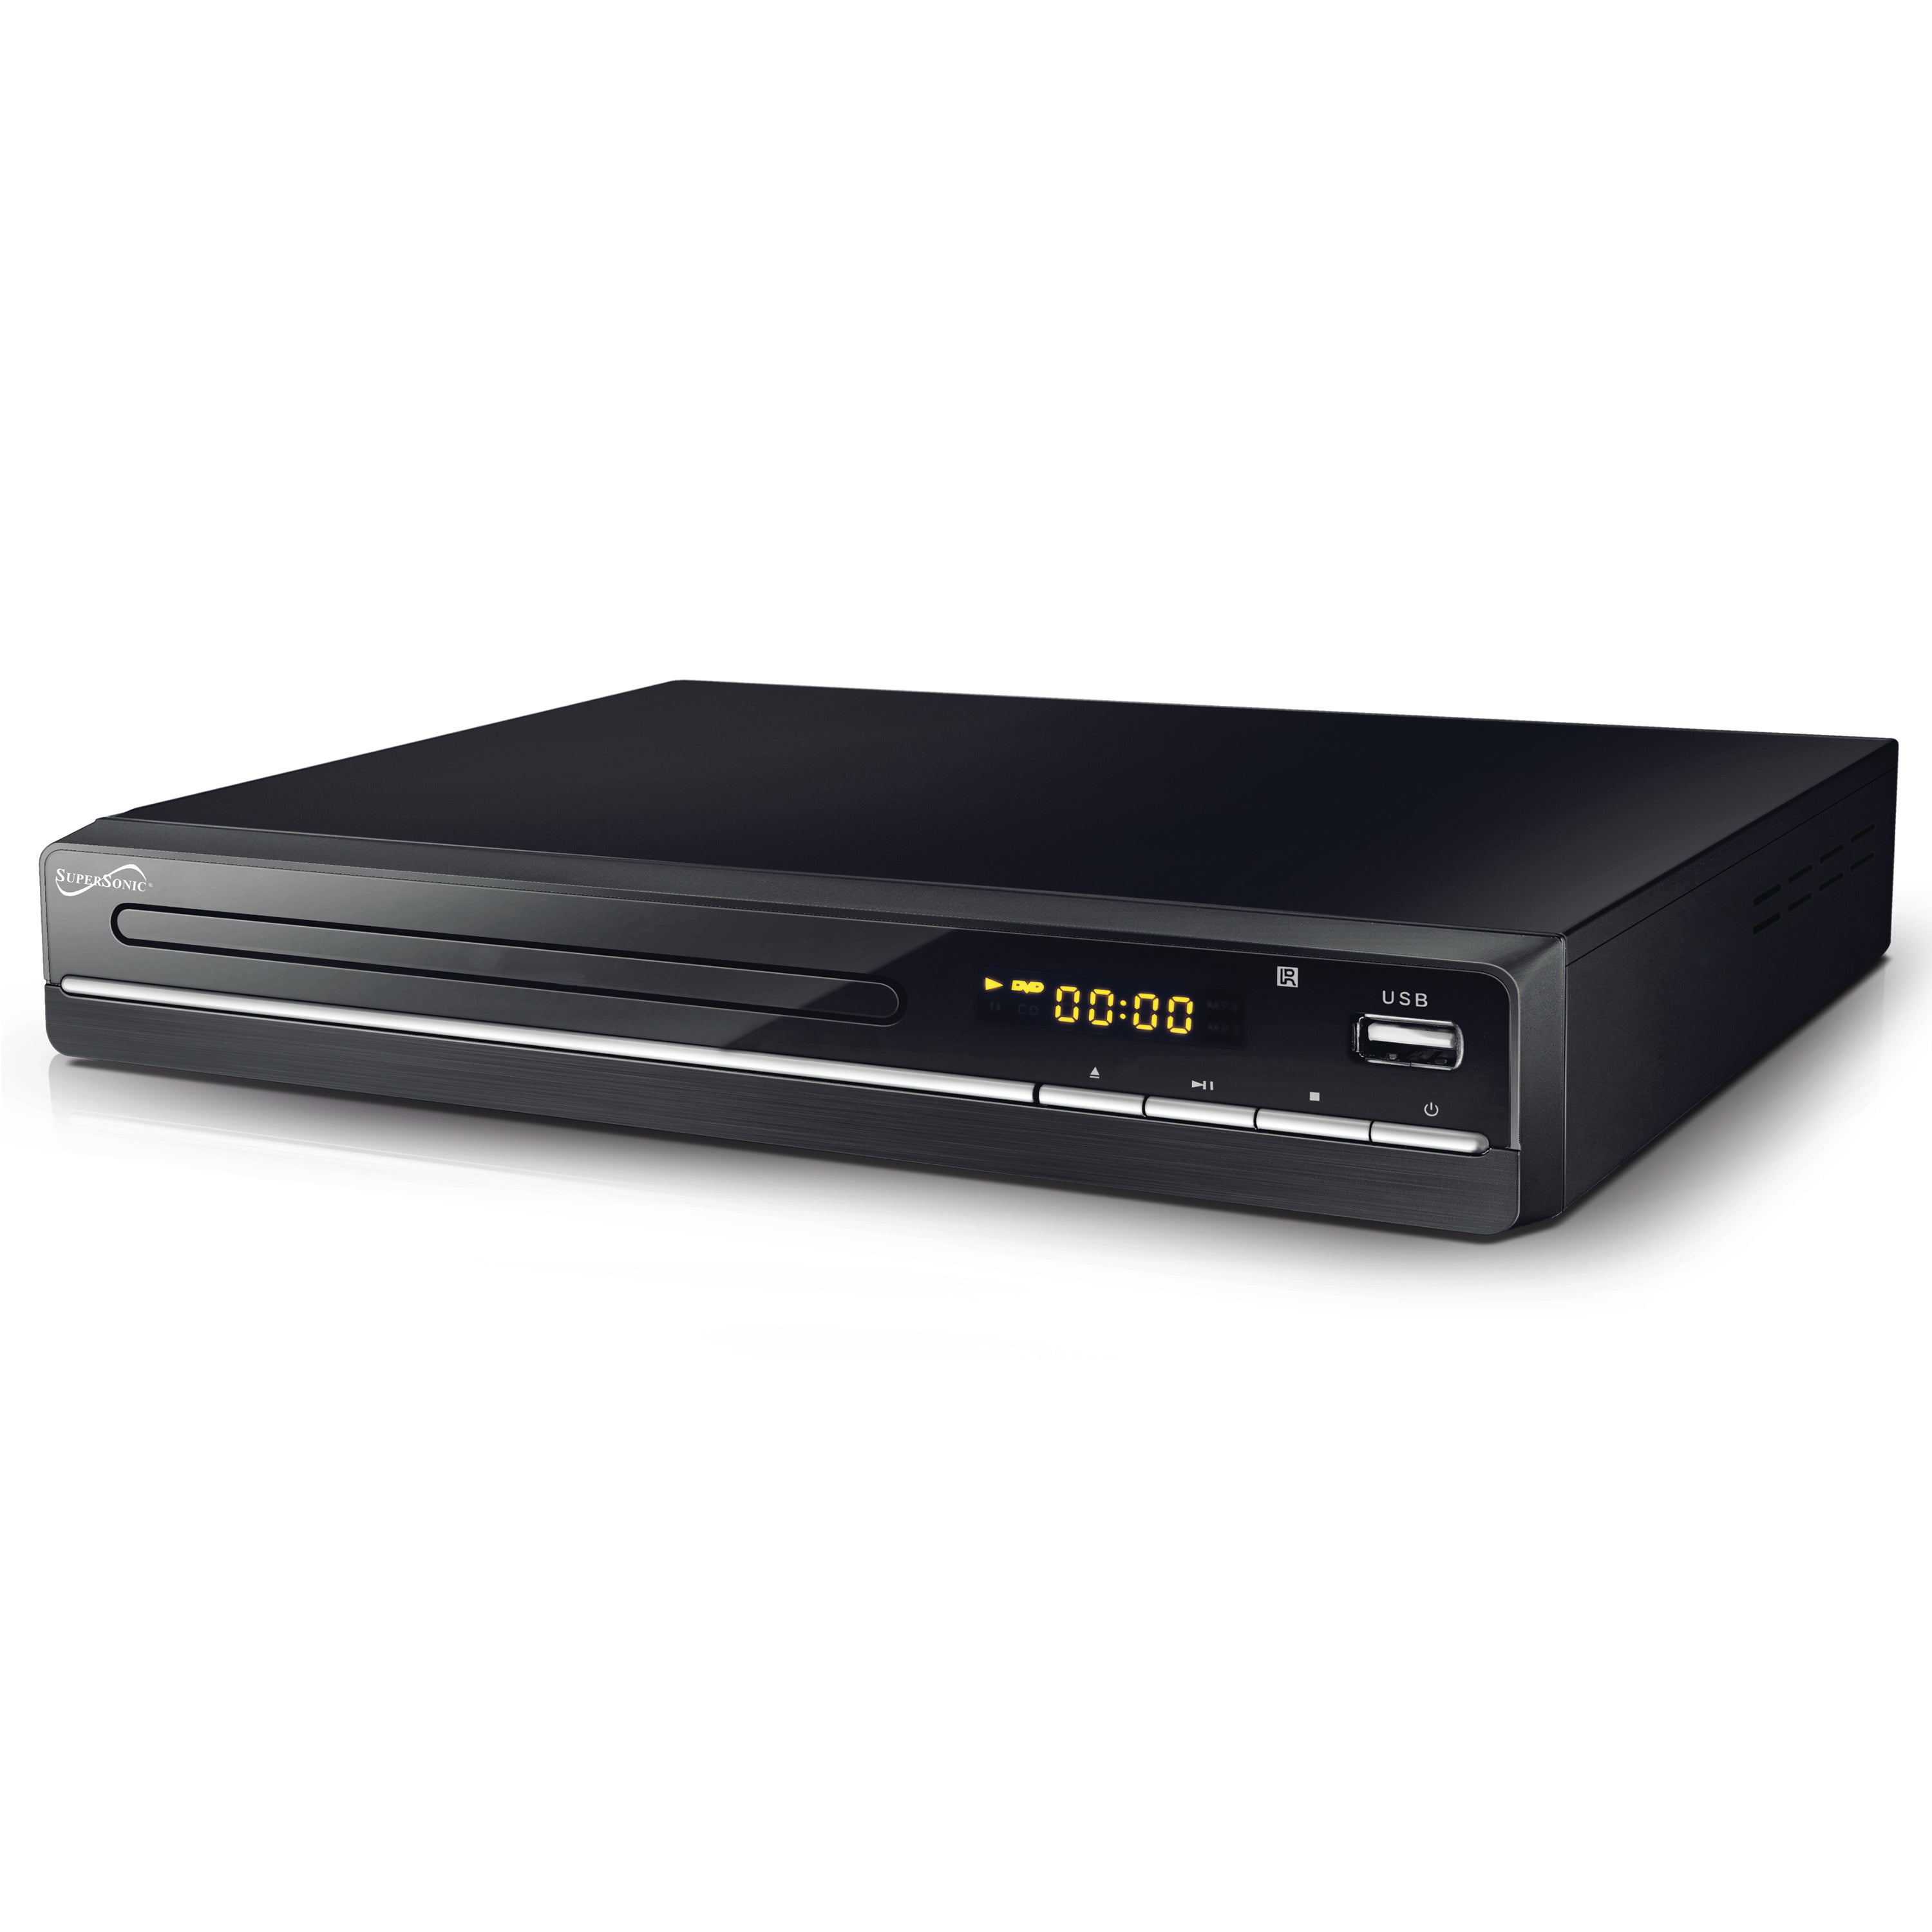 Supersonic SC-20H 2.0 Channel DVD Player -Free Multi-Zone NTSC/PAL